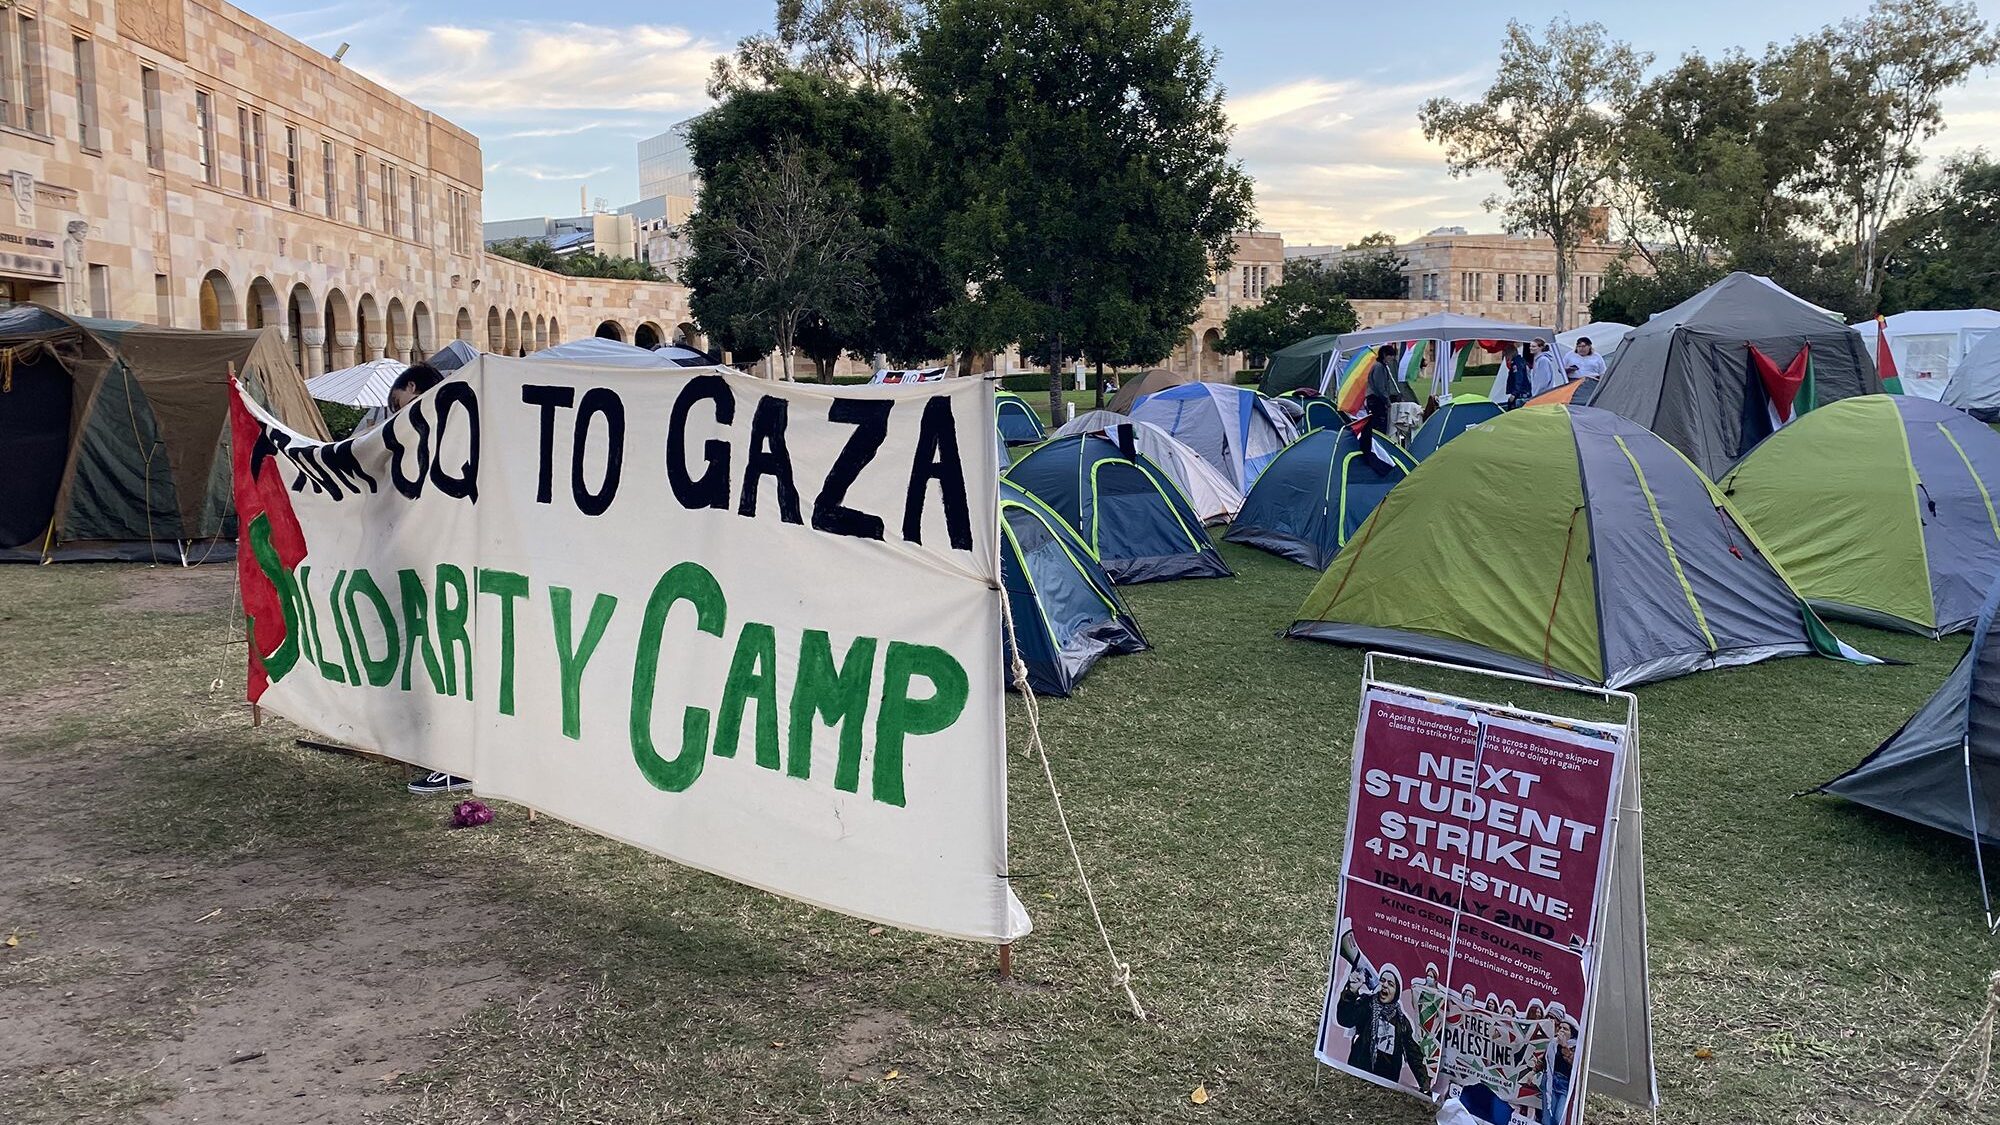 Camps have sprung up at several university campuses across Australia....